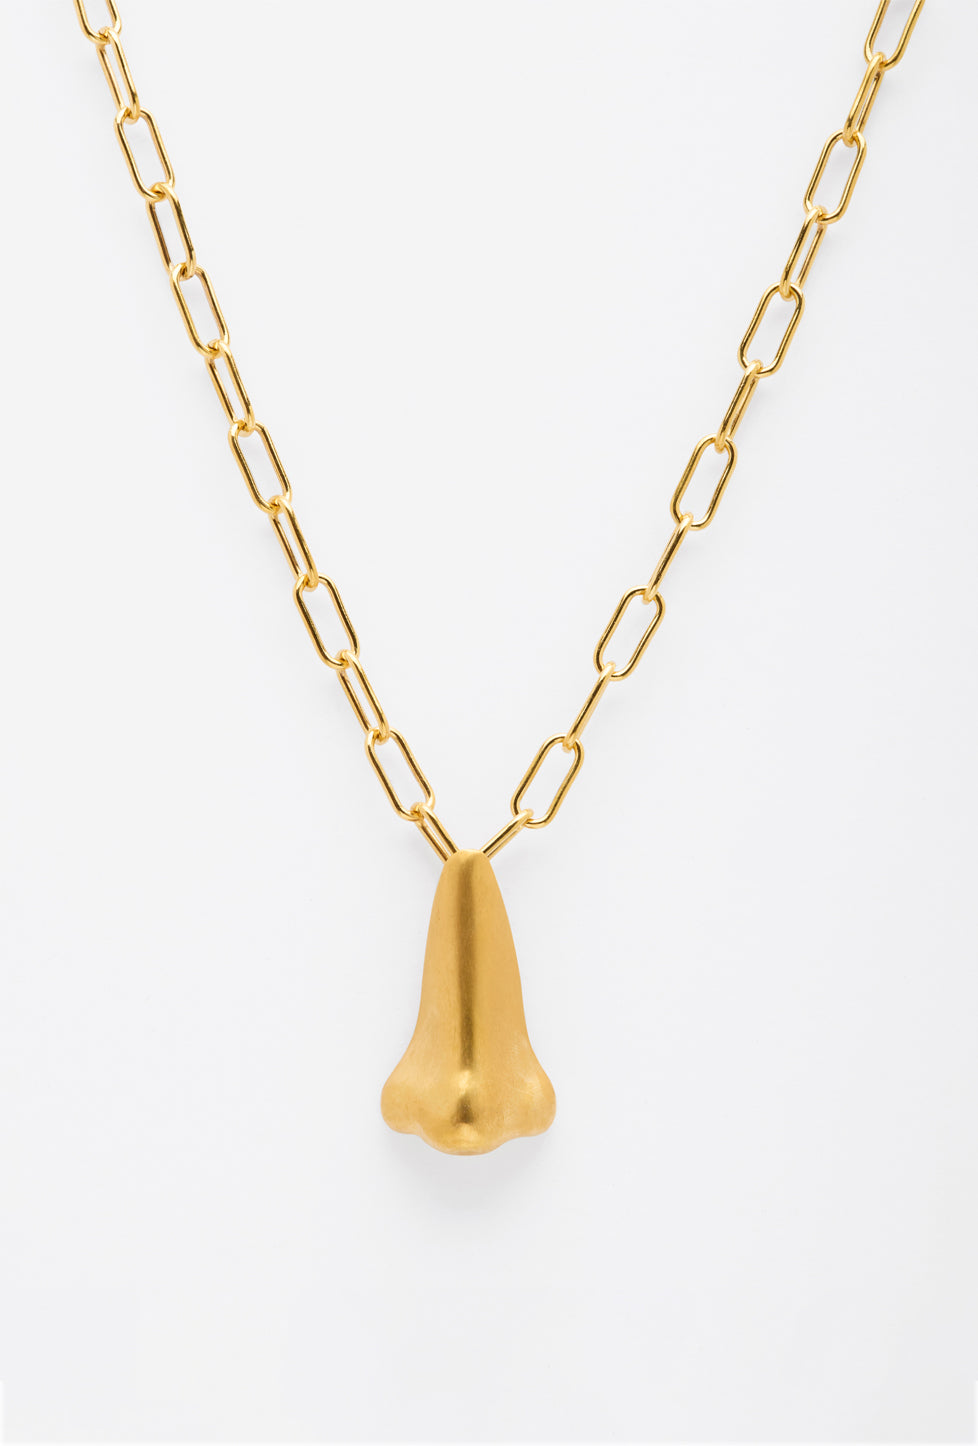 Link-chain Nose Necklace